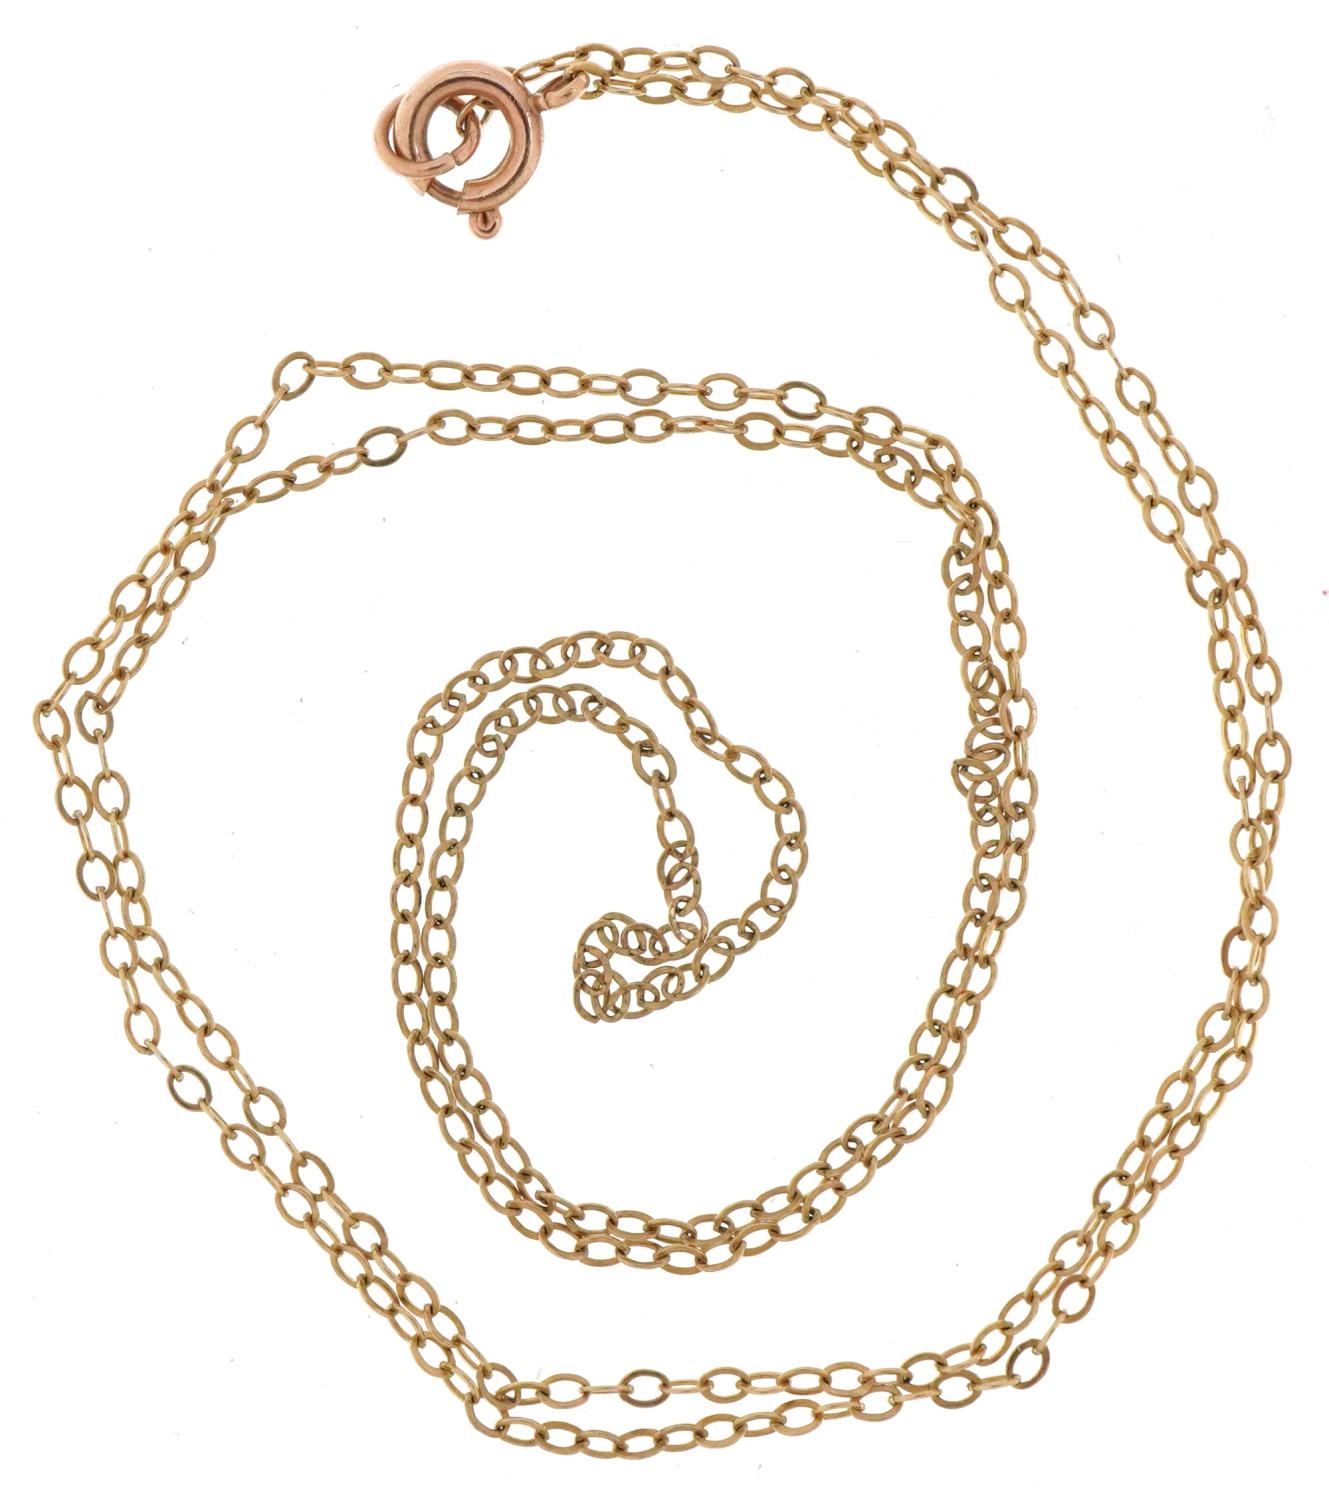 9ct gold fine paperchain link necklace, 44cm in length, 0.8g - Image 2 of 2